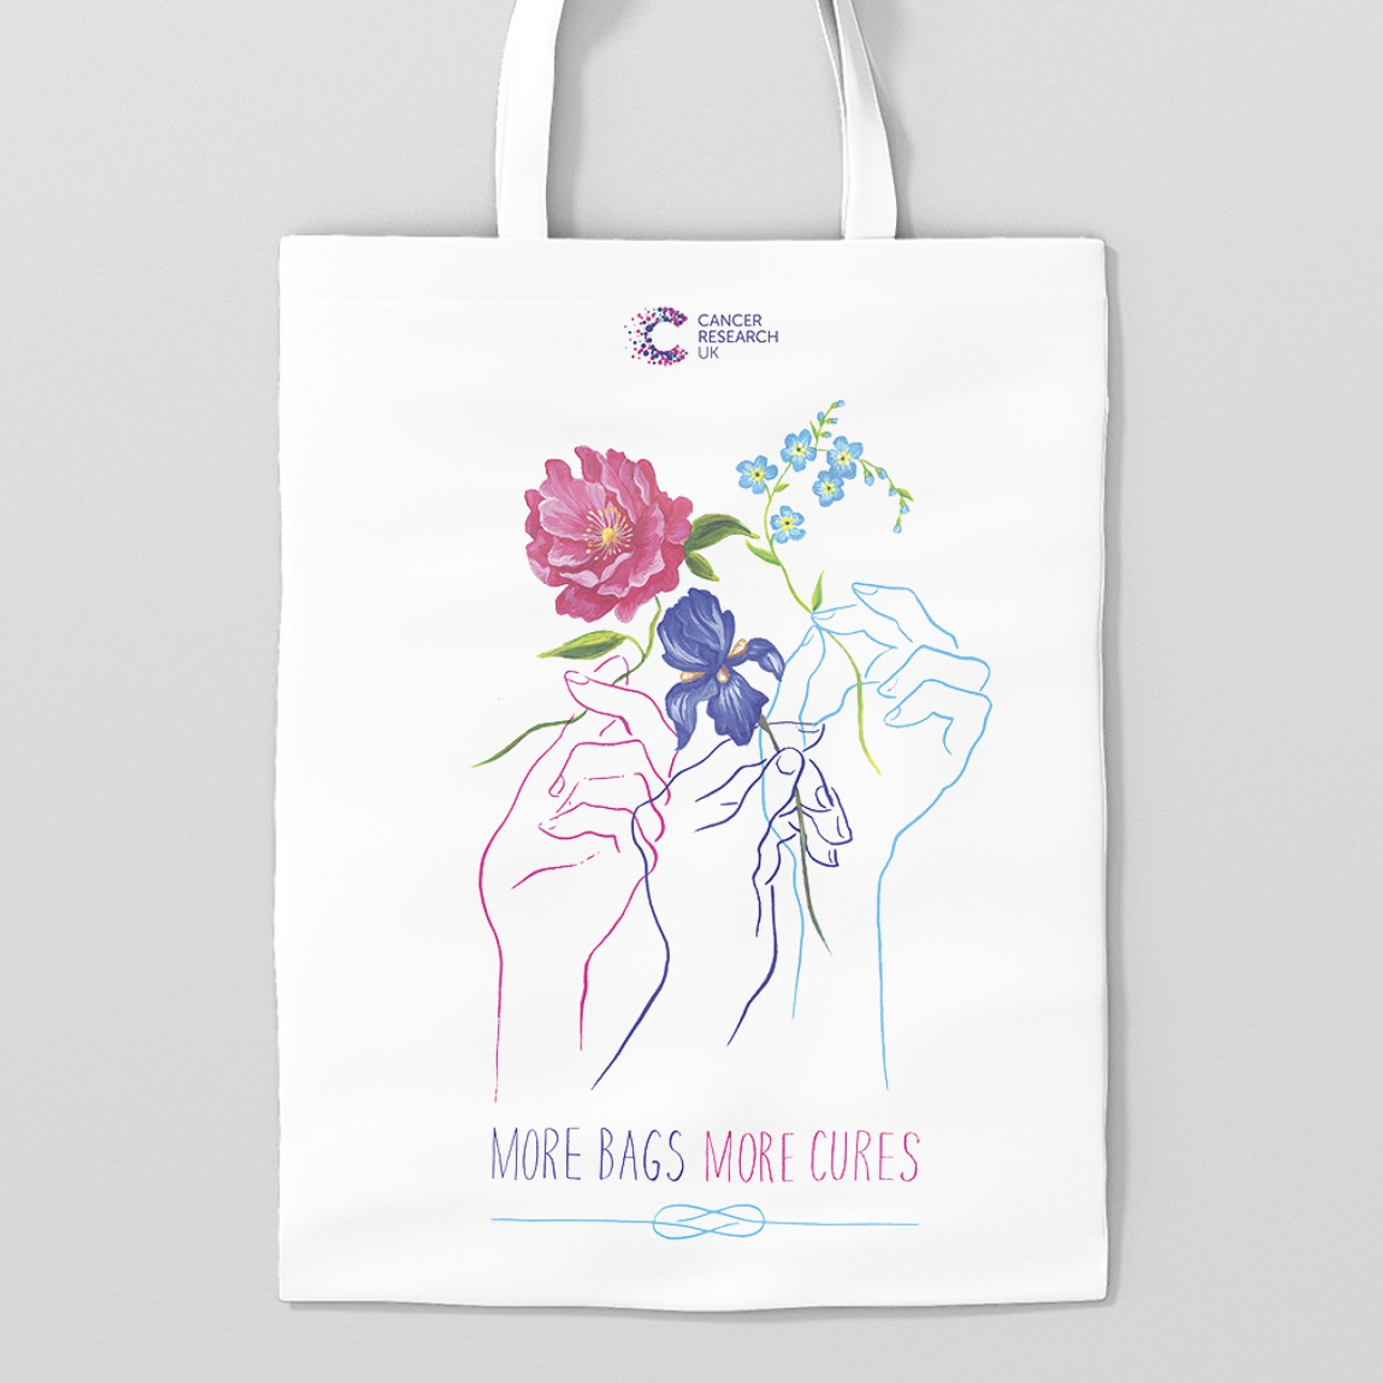 Cancer Research Tote Bag Design